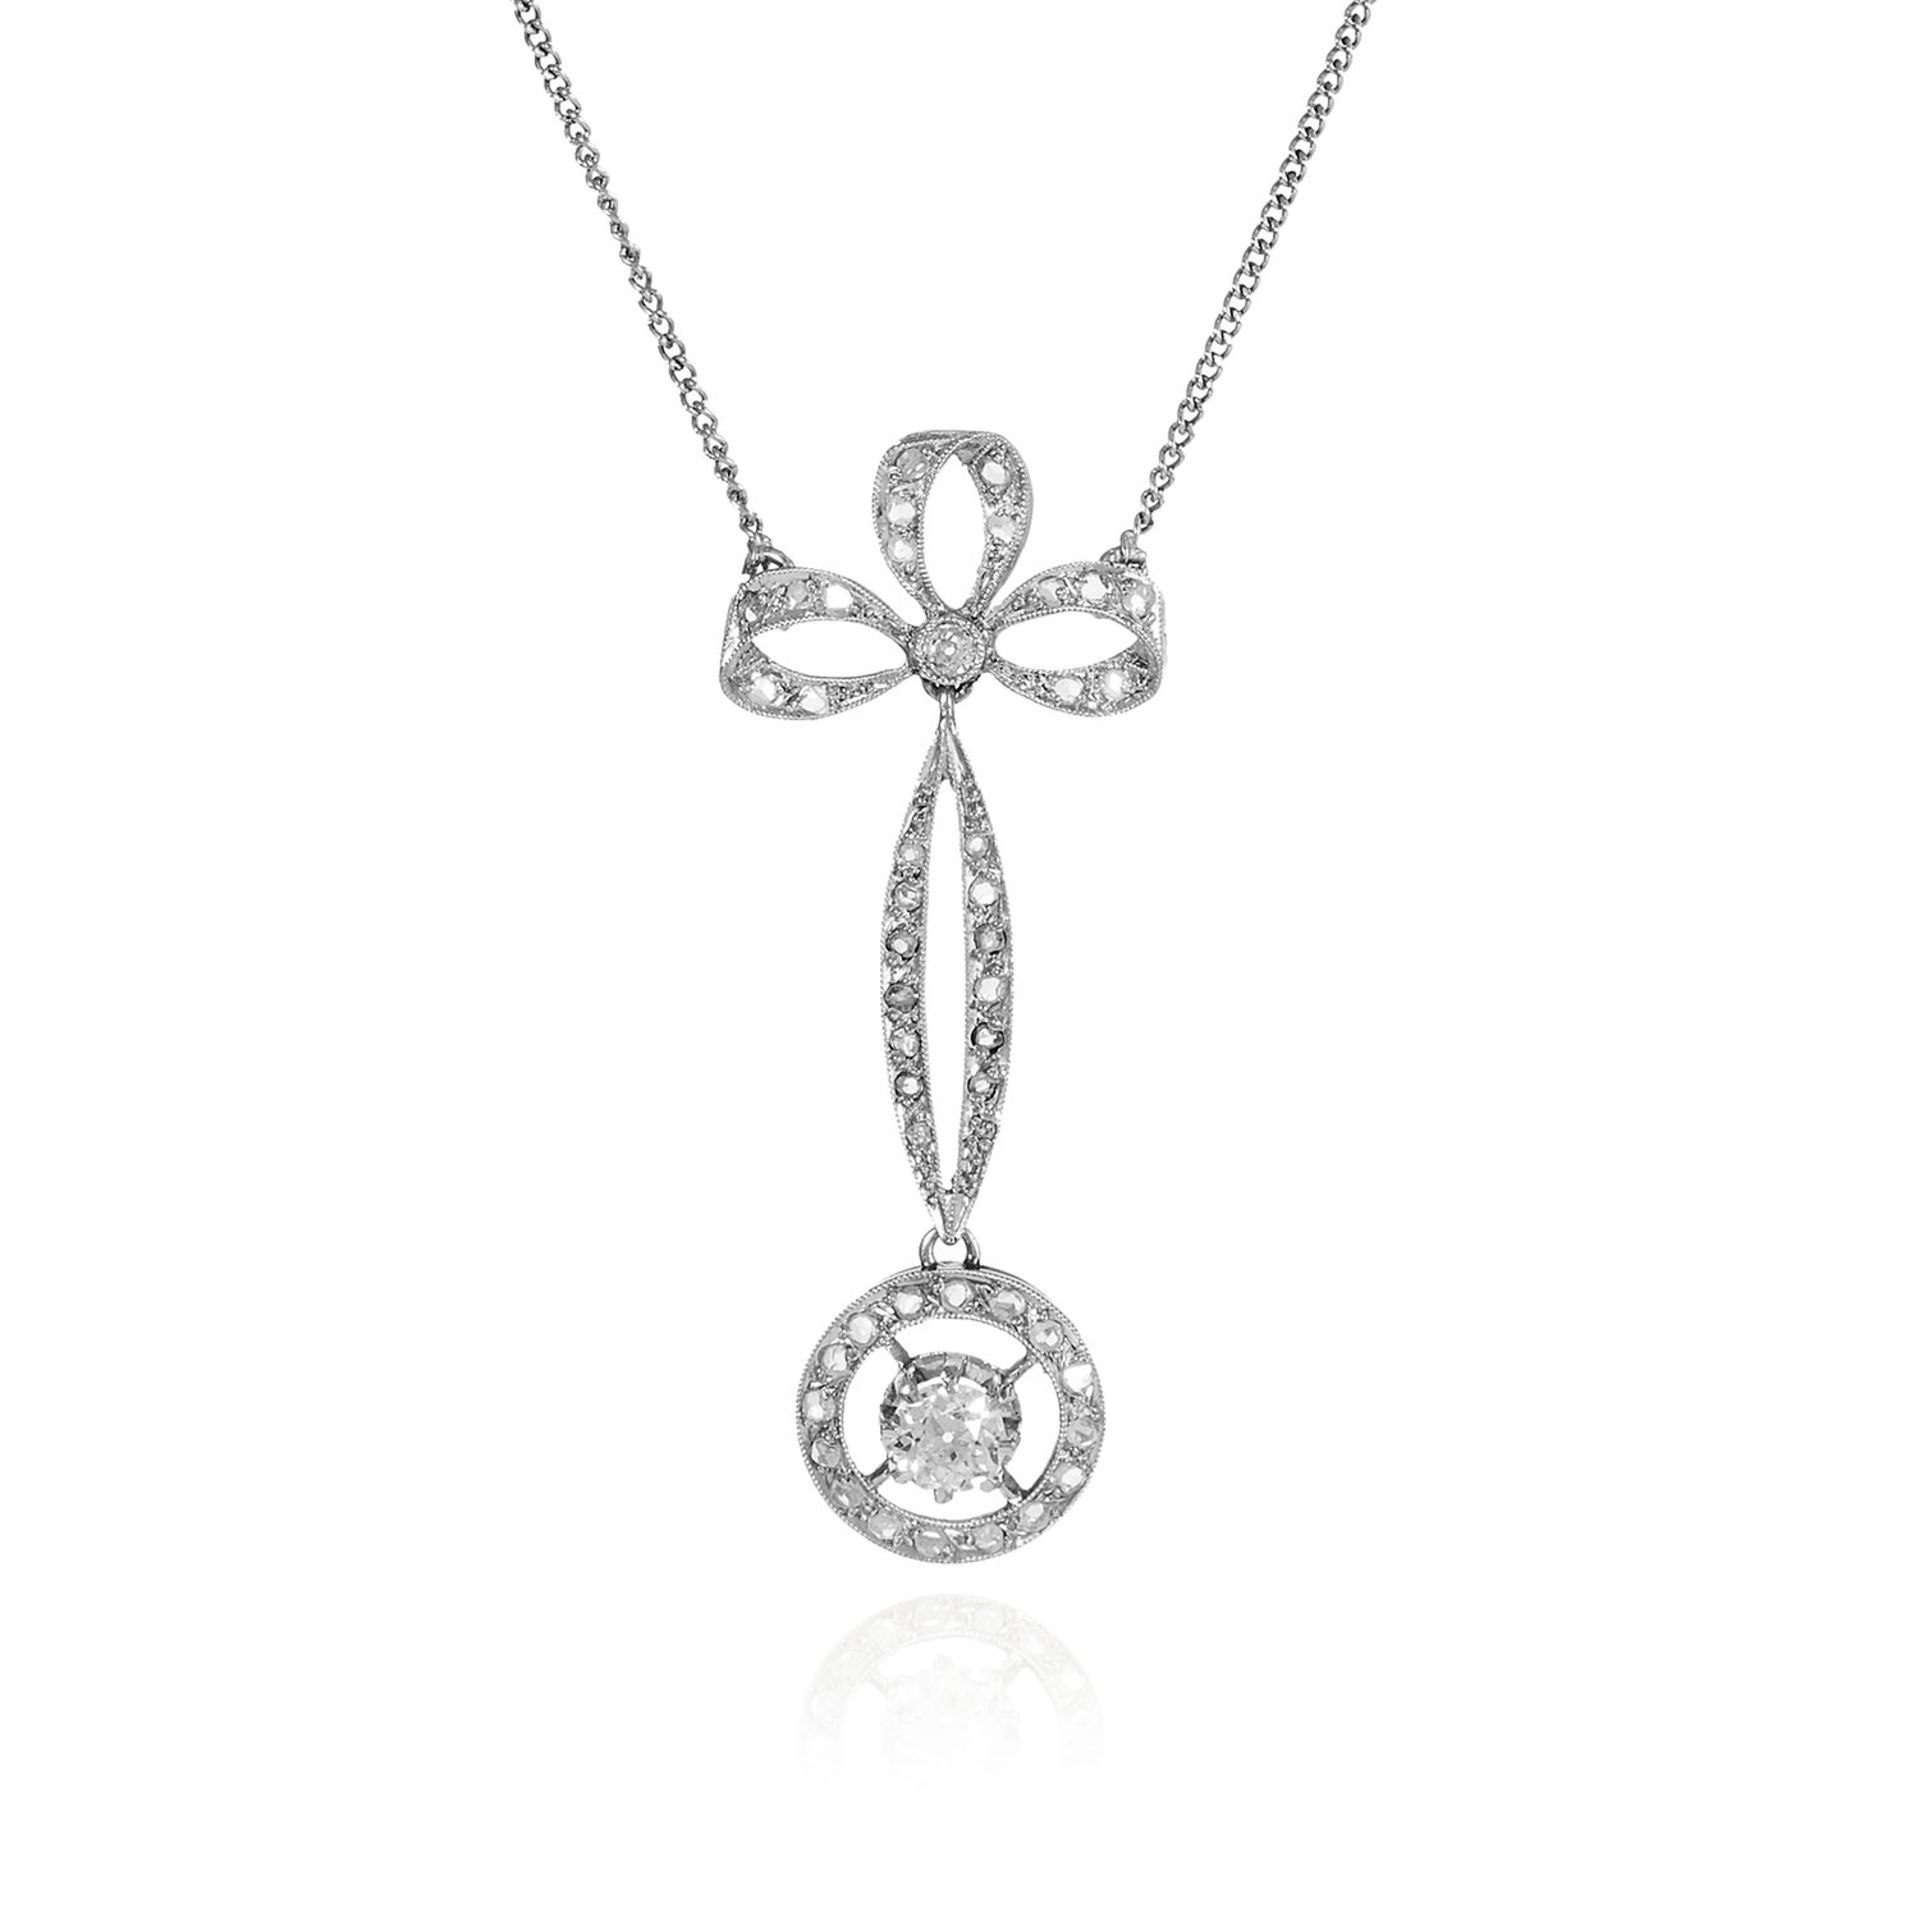 AN ANTIQUE DIAMOND NECKLACE in white gold or platinum, formed of a ribbon and bow motif, set with